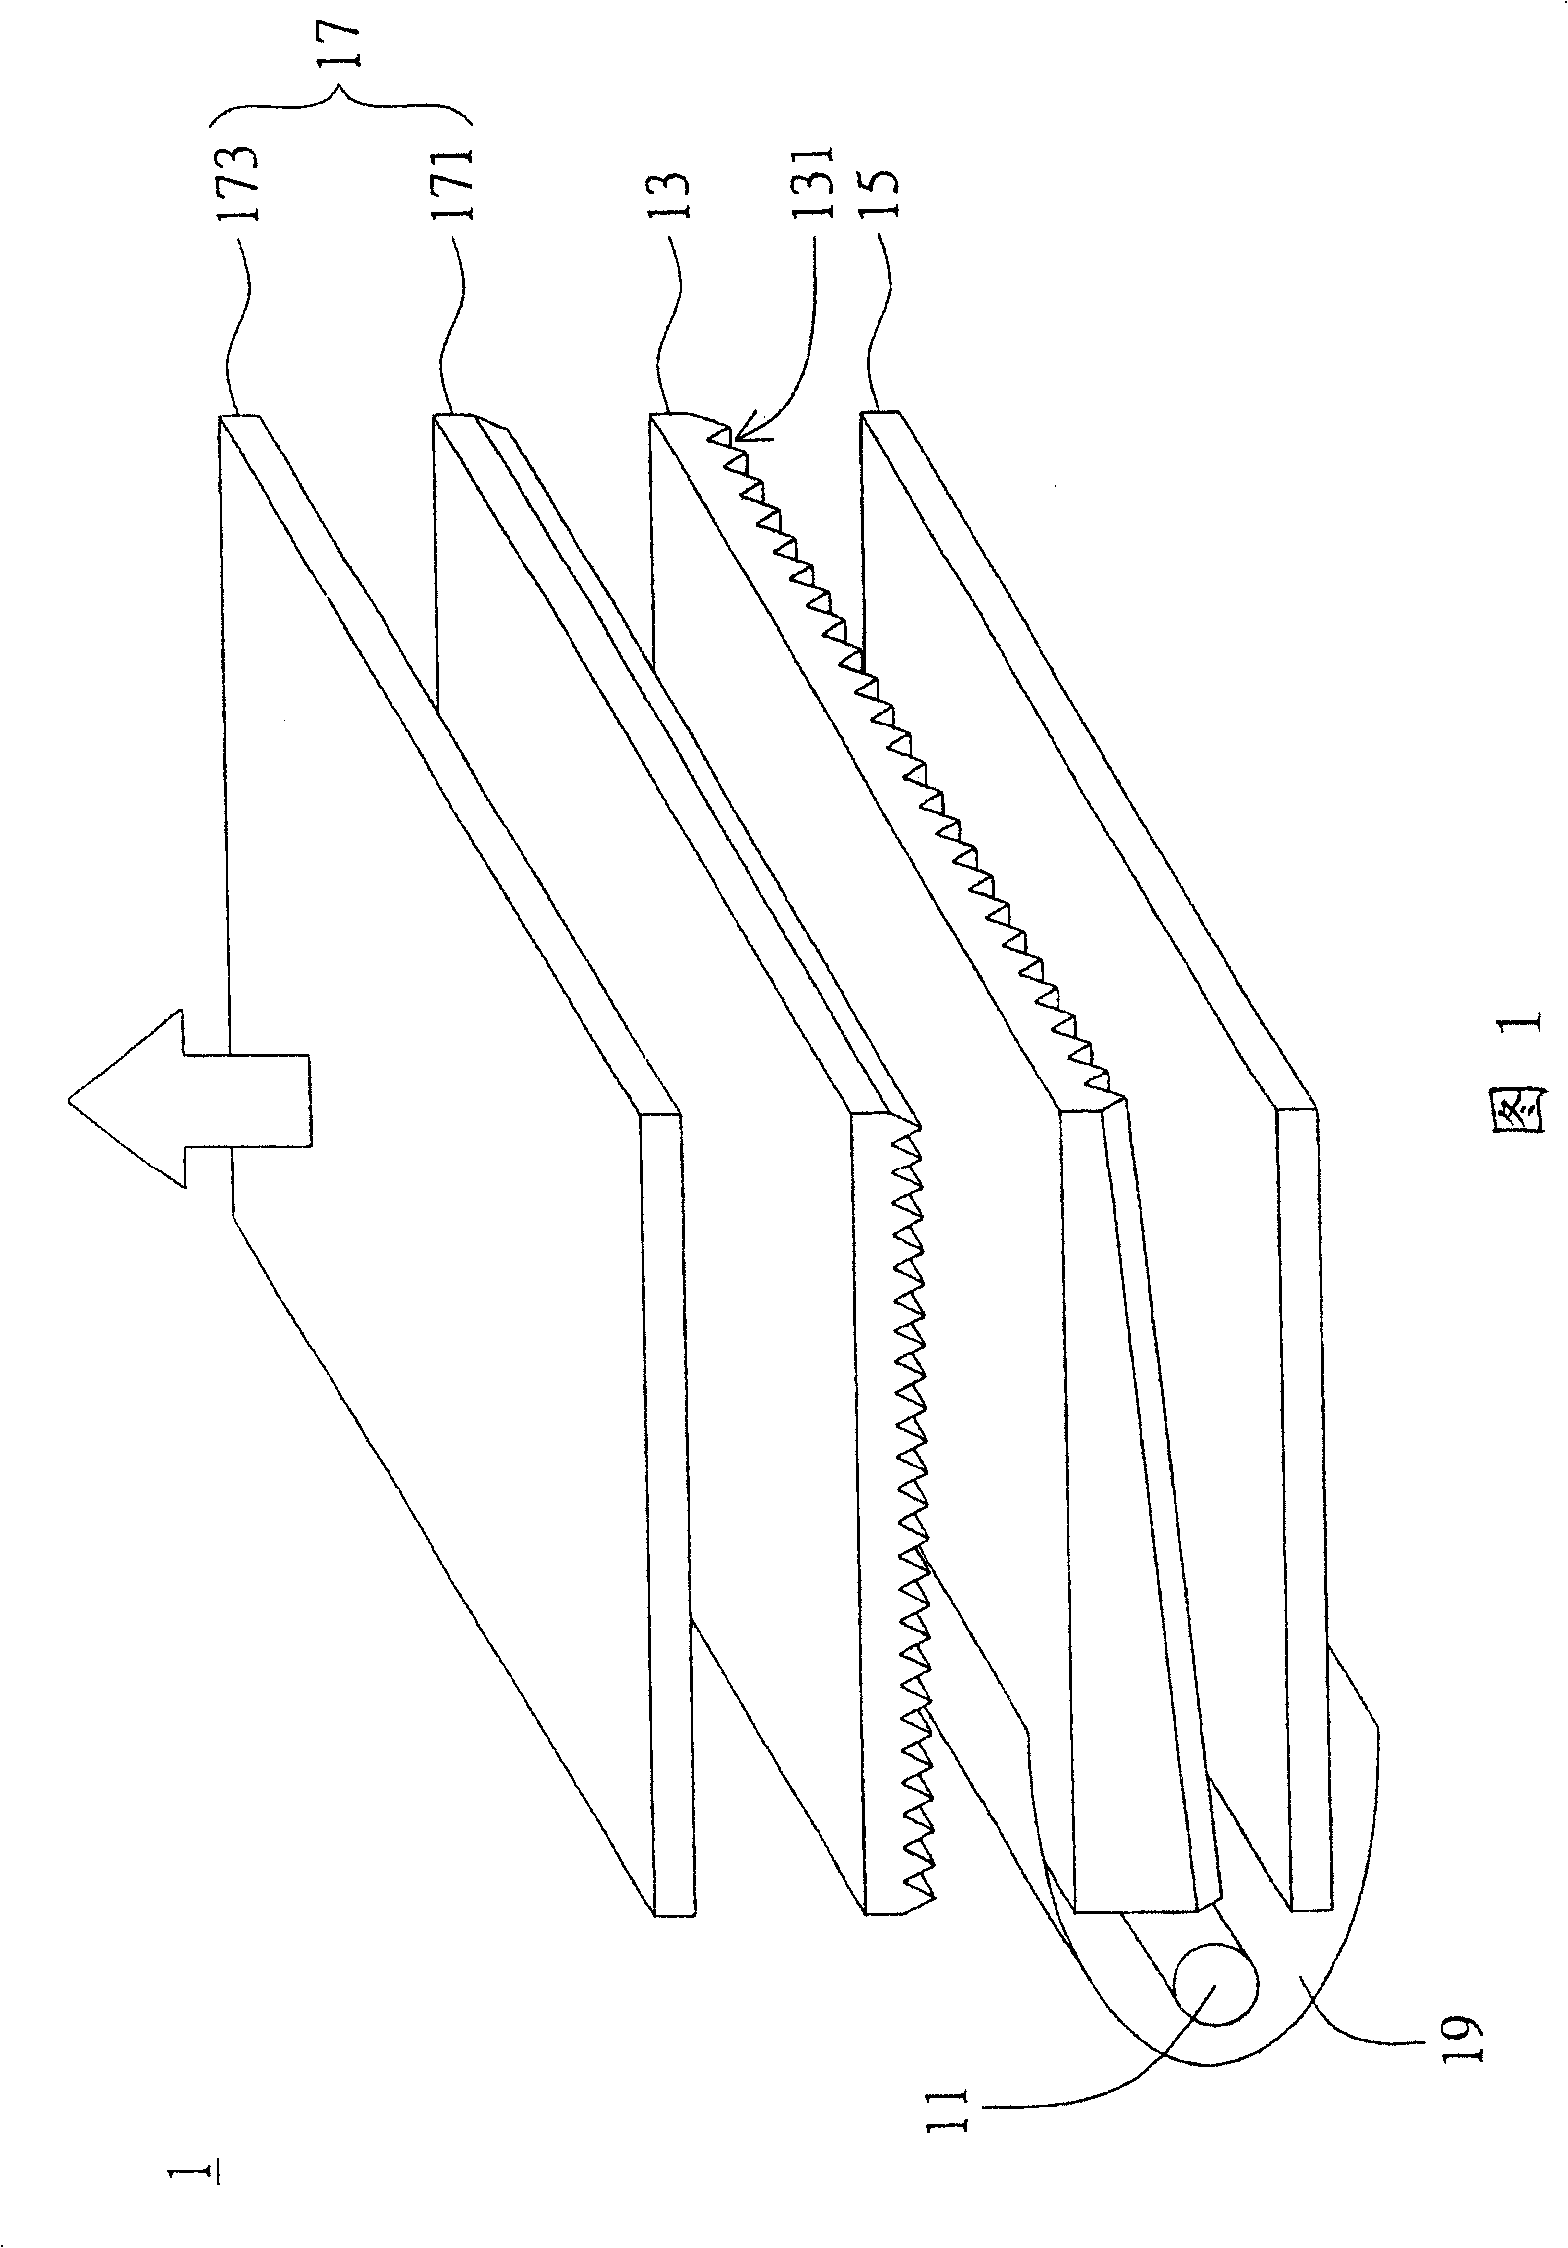 Light guide plate and back light unit employing the same